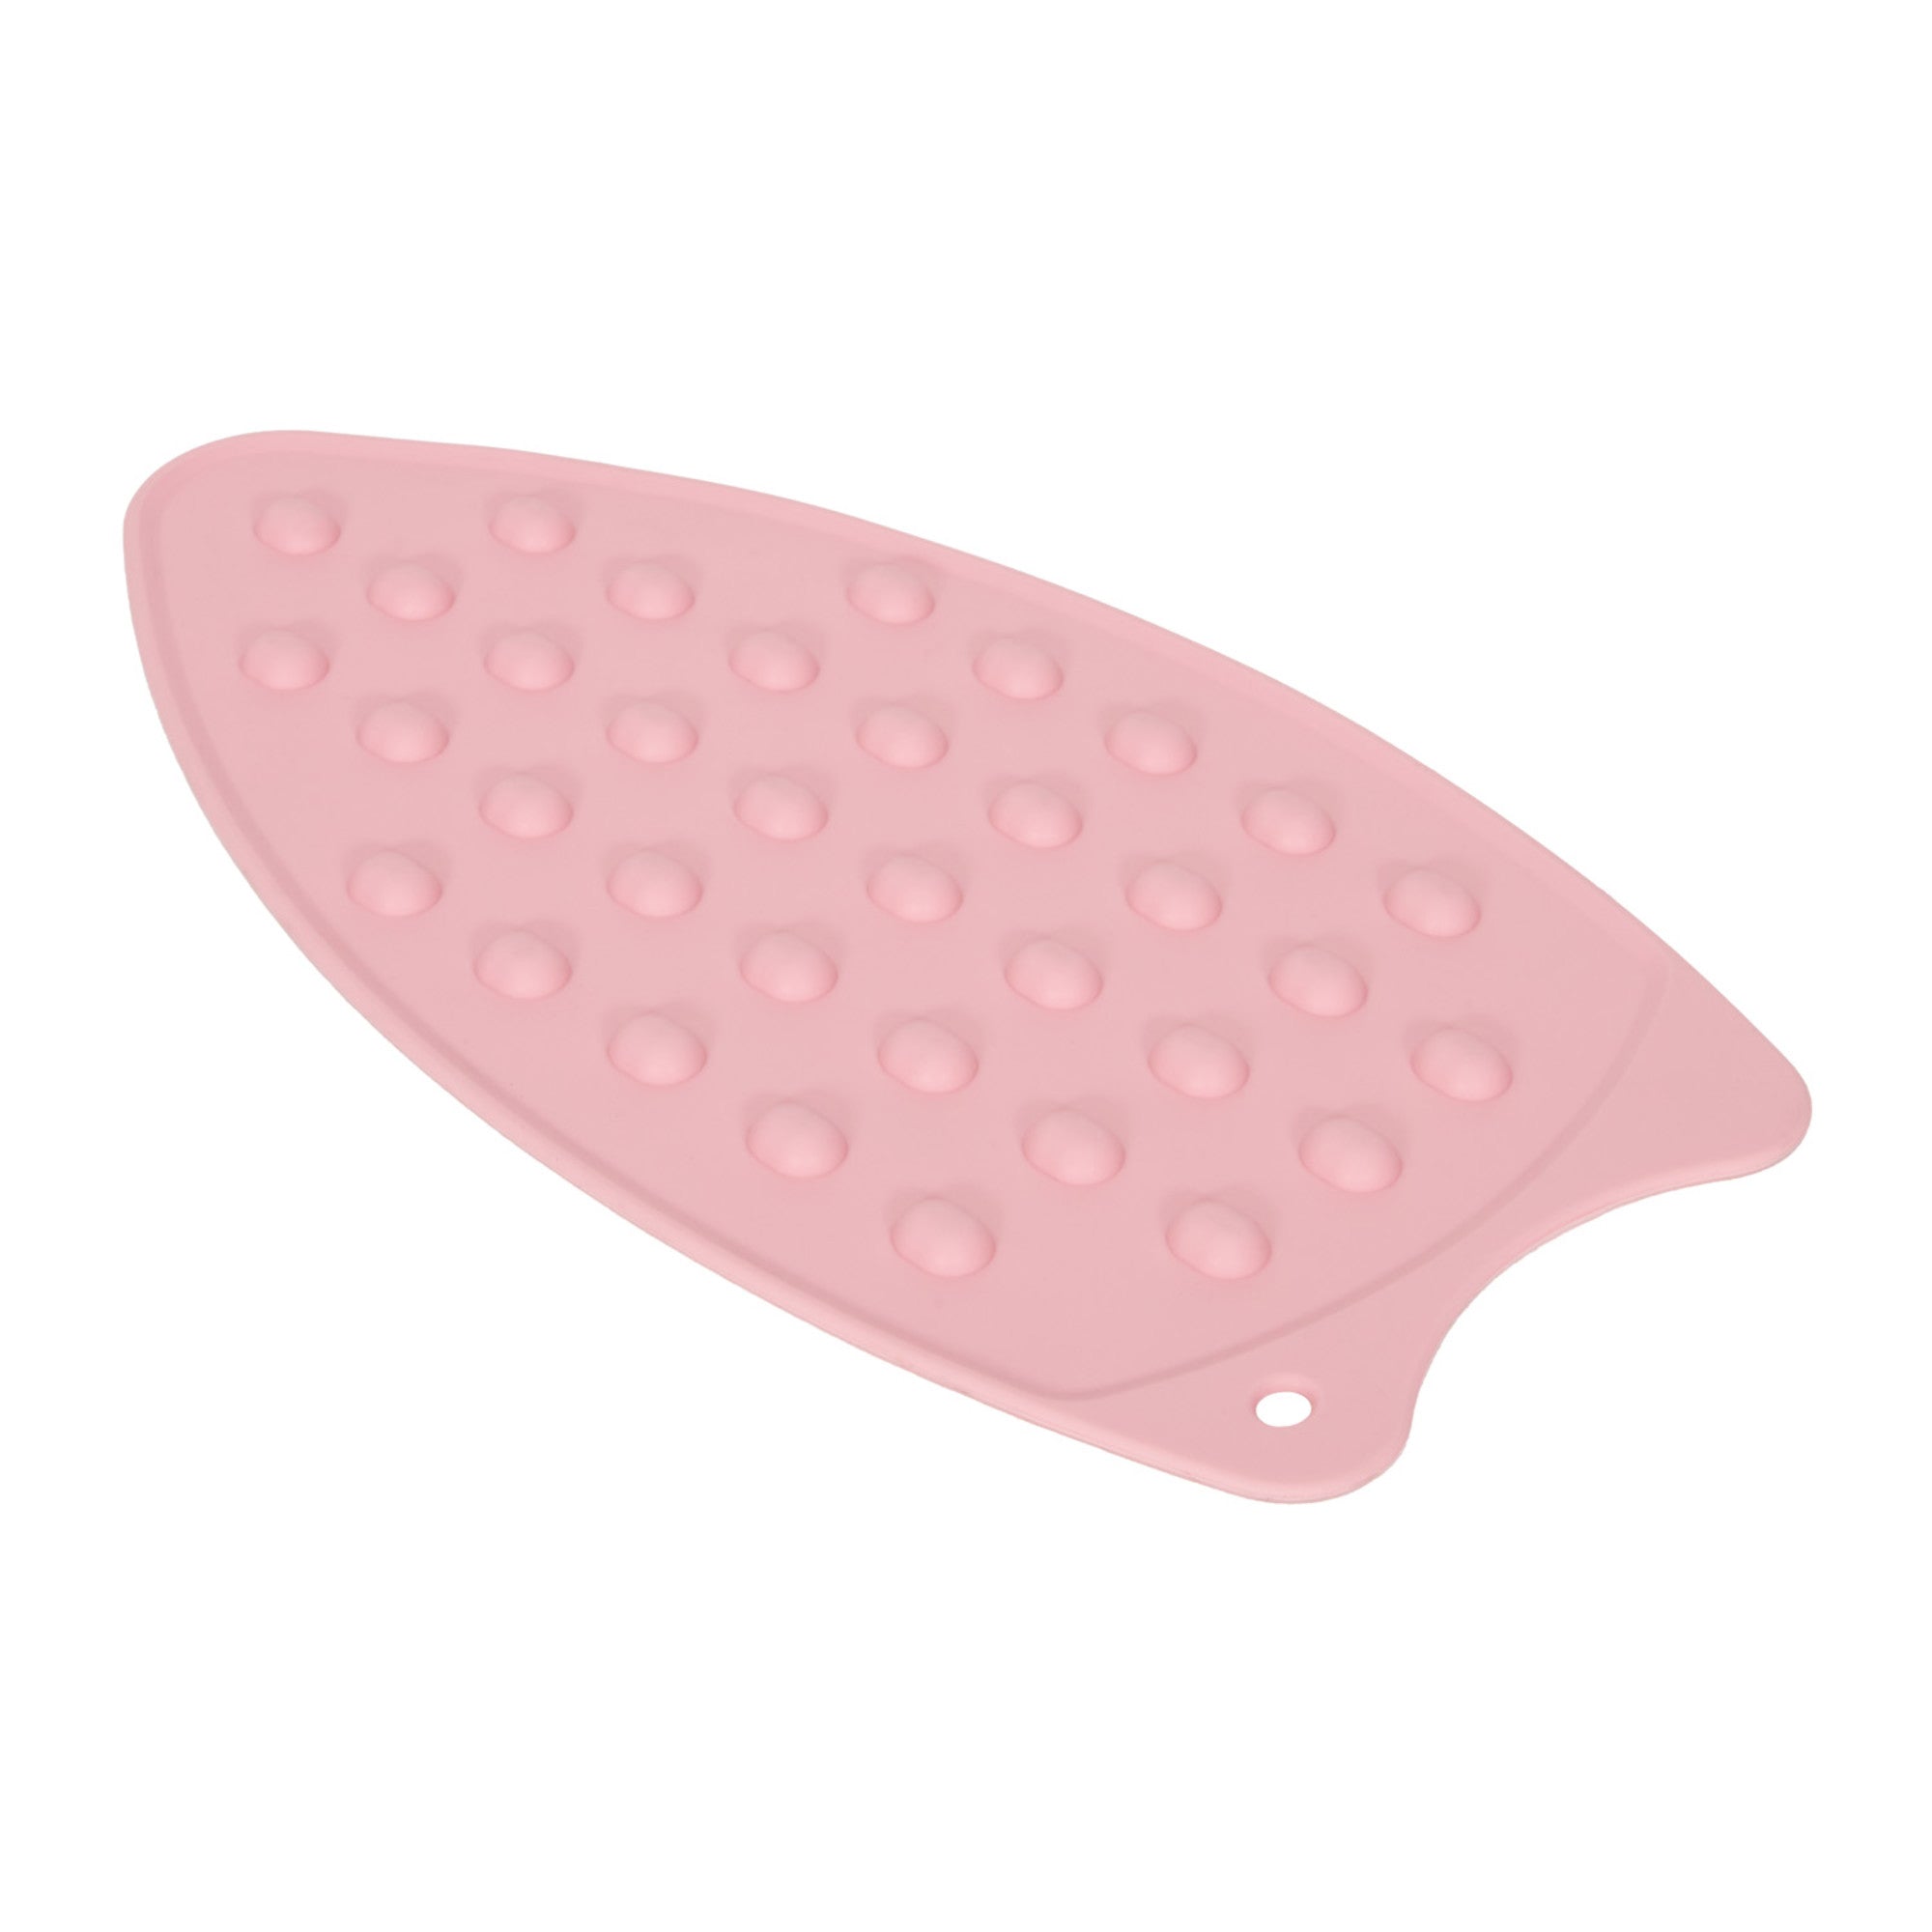 Home Basics Silicone Ironing Mat - Assorted Colors